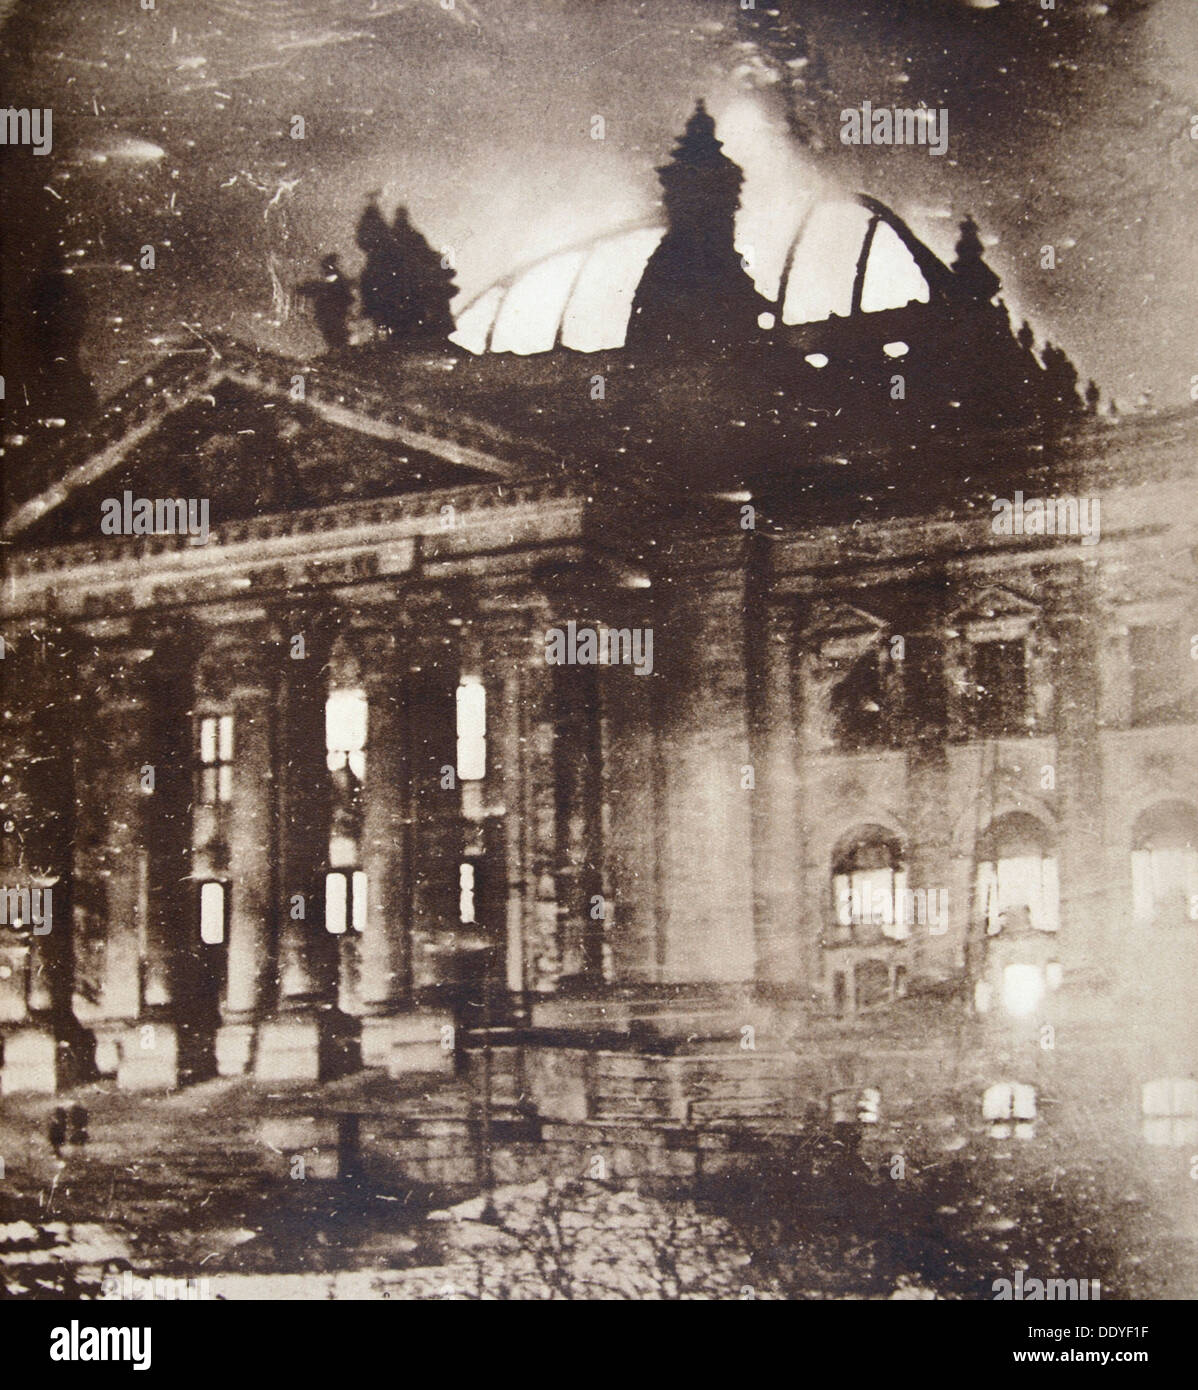 The Reichstag on fire, Berlin, Germany, 27 February 1933. Artist: Unknown Stock Photo